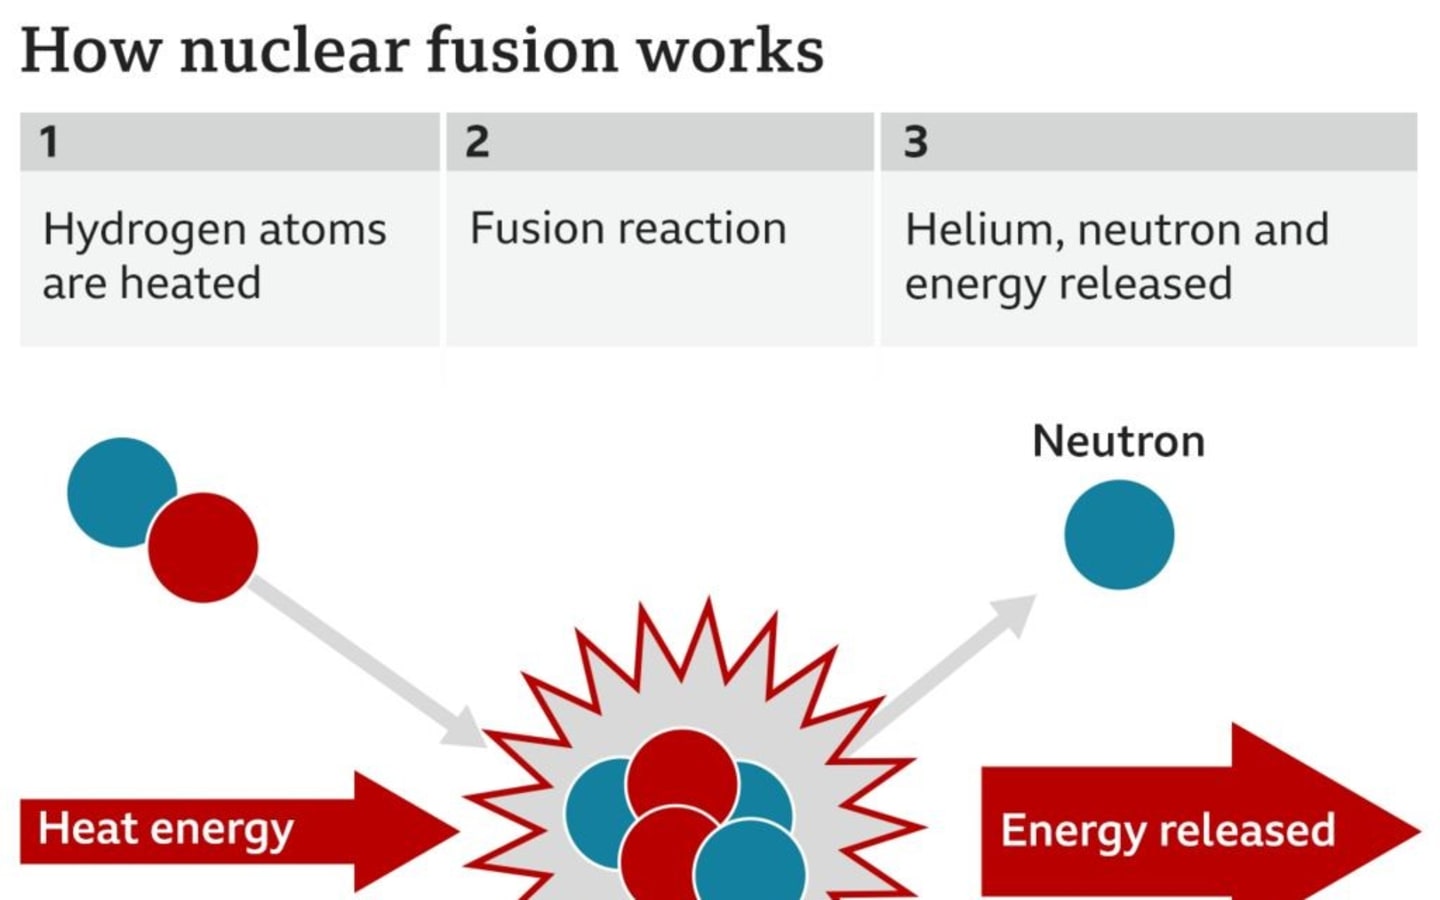 A graphic showing how nuclear fusion works.